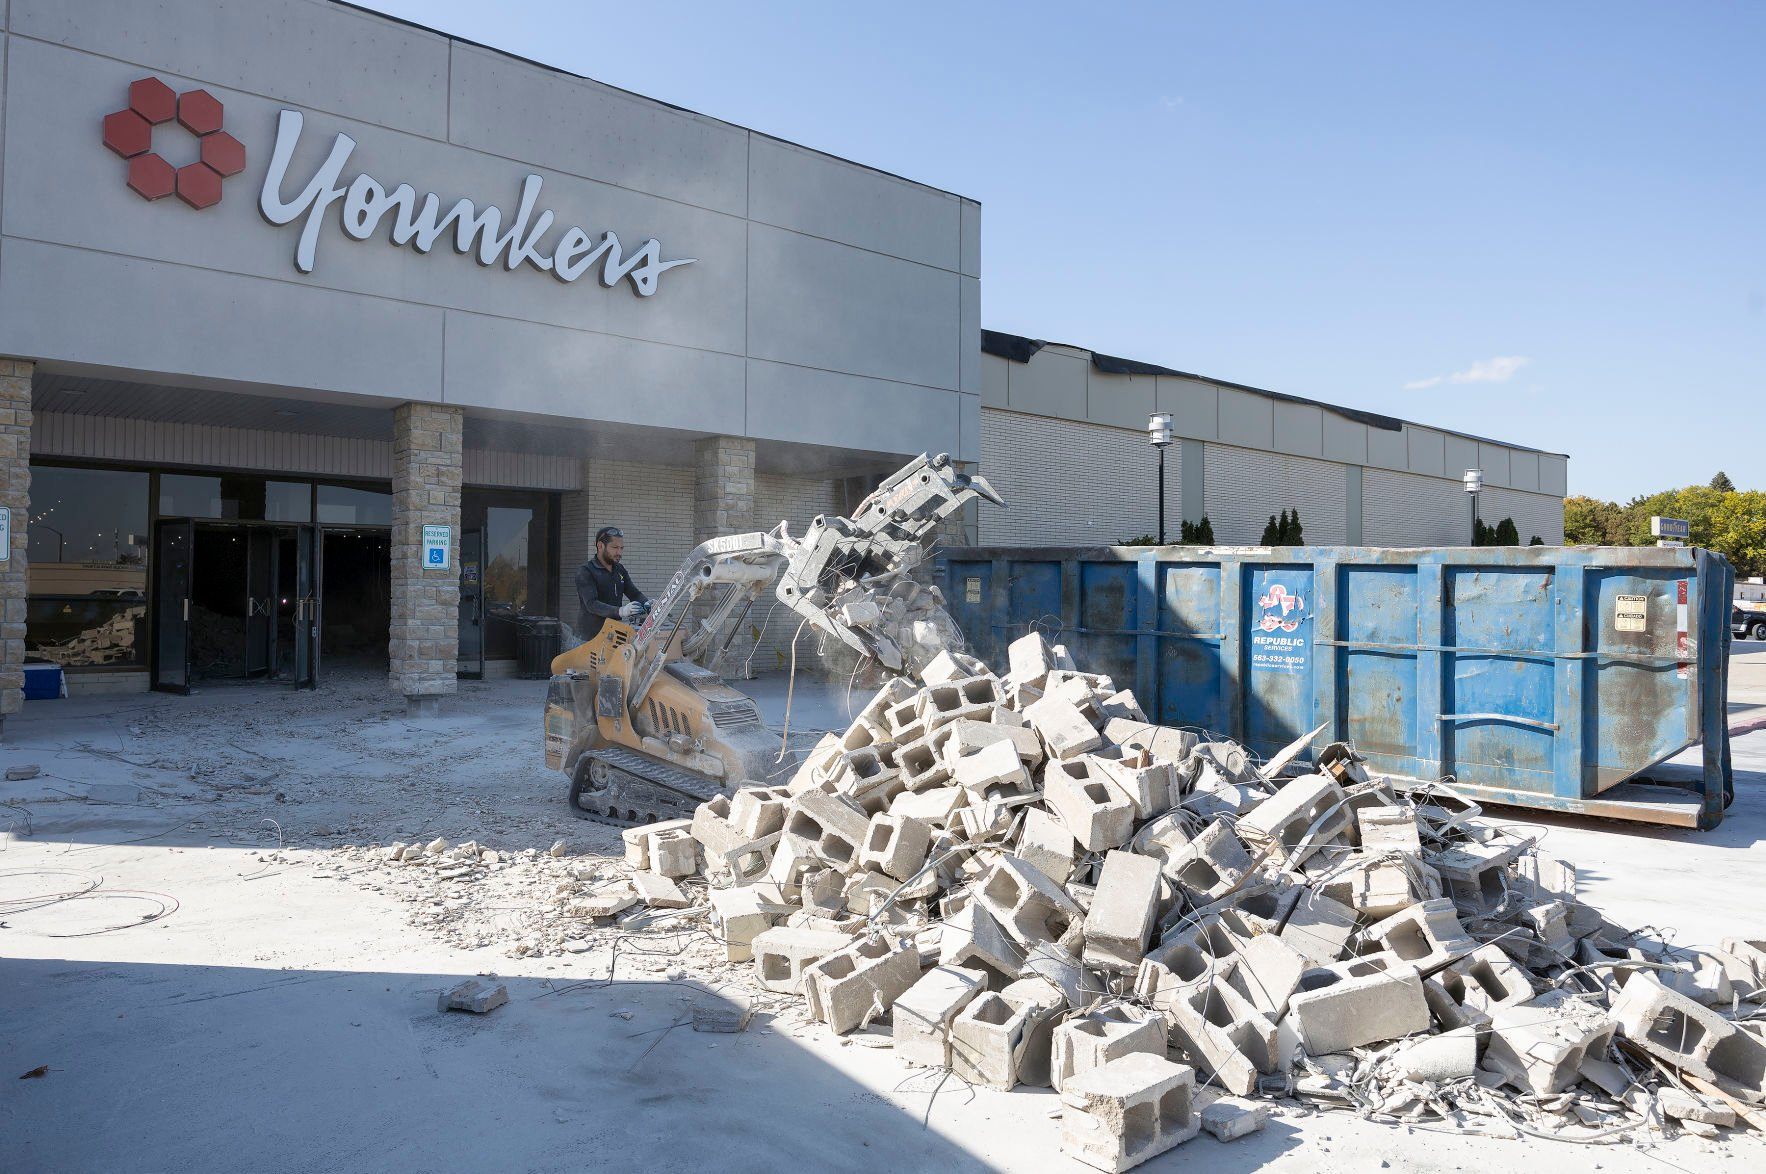 Construction crews work on clearing out the former Younkers women